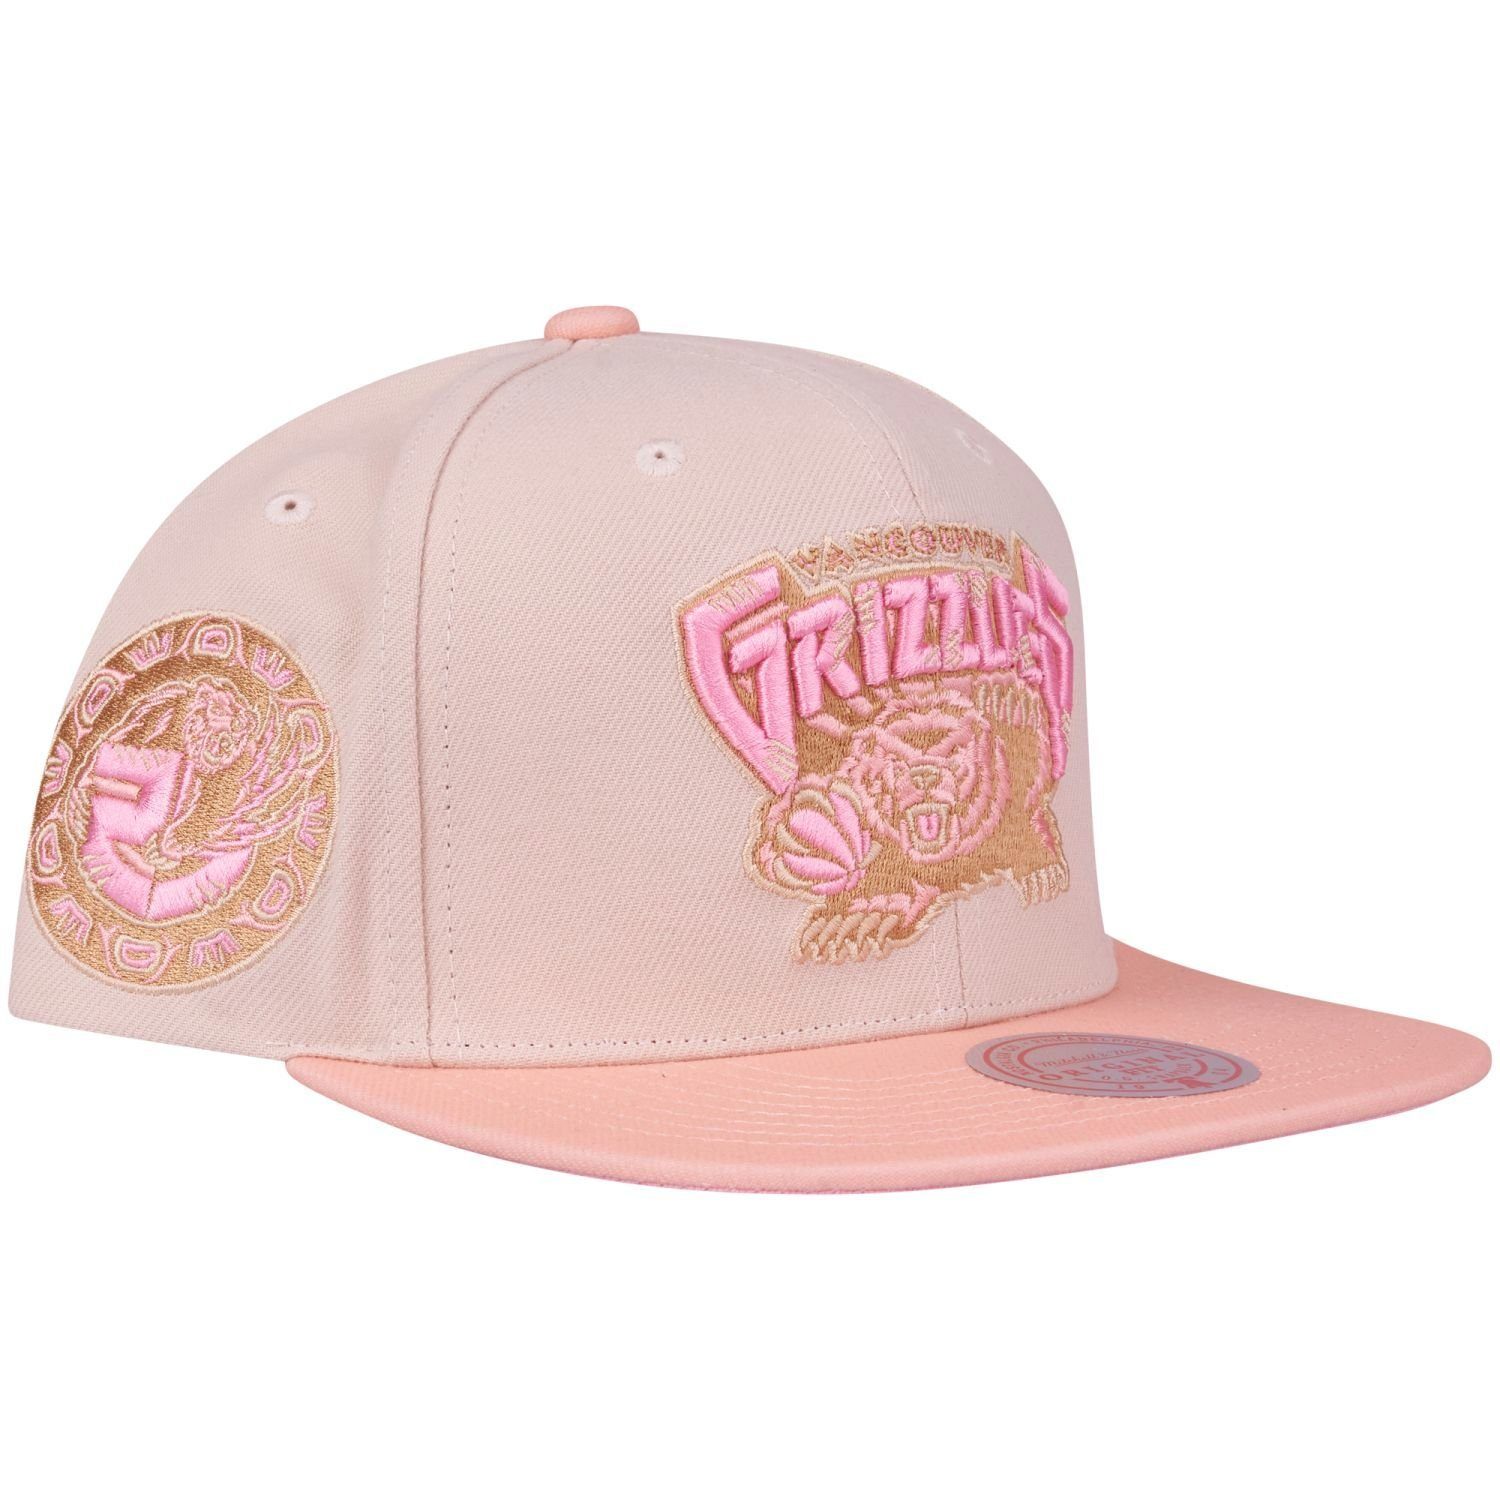 Grizzlies LANE & Cap Mitchell Vancouver LOVERS Ness Snapback